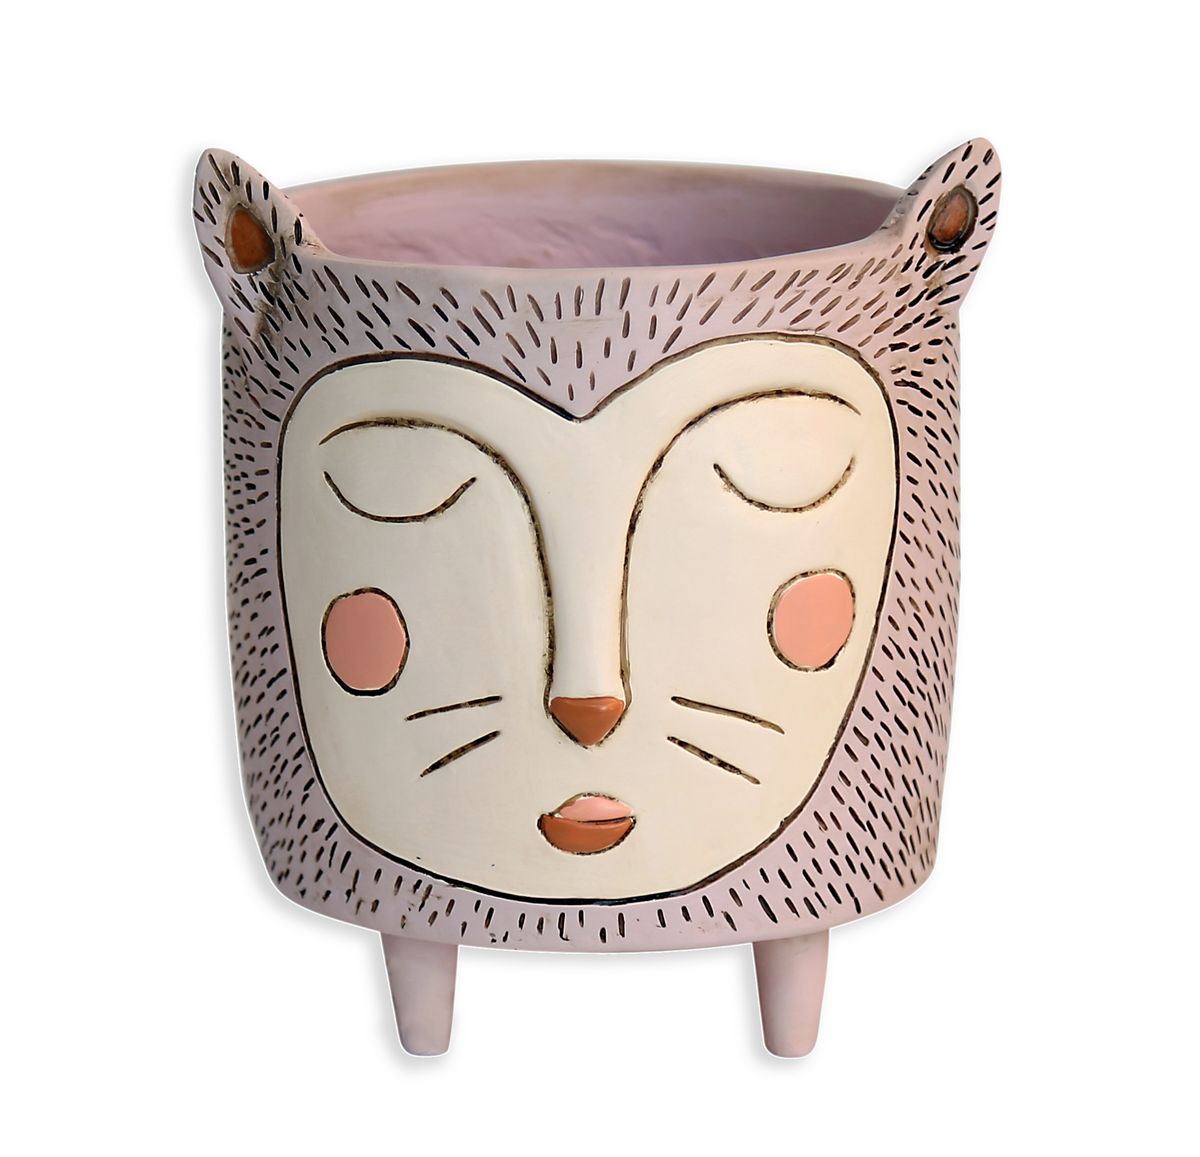 Pot Plant Planter Purrs Cat - The Renmy Store Homewares & Gifts 